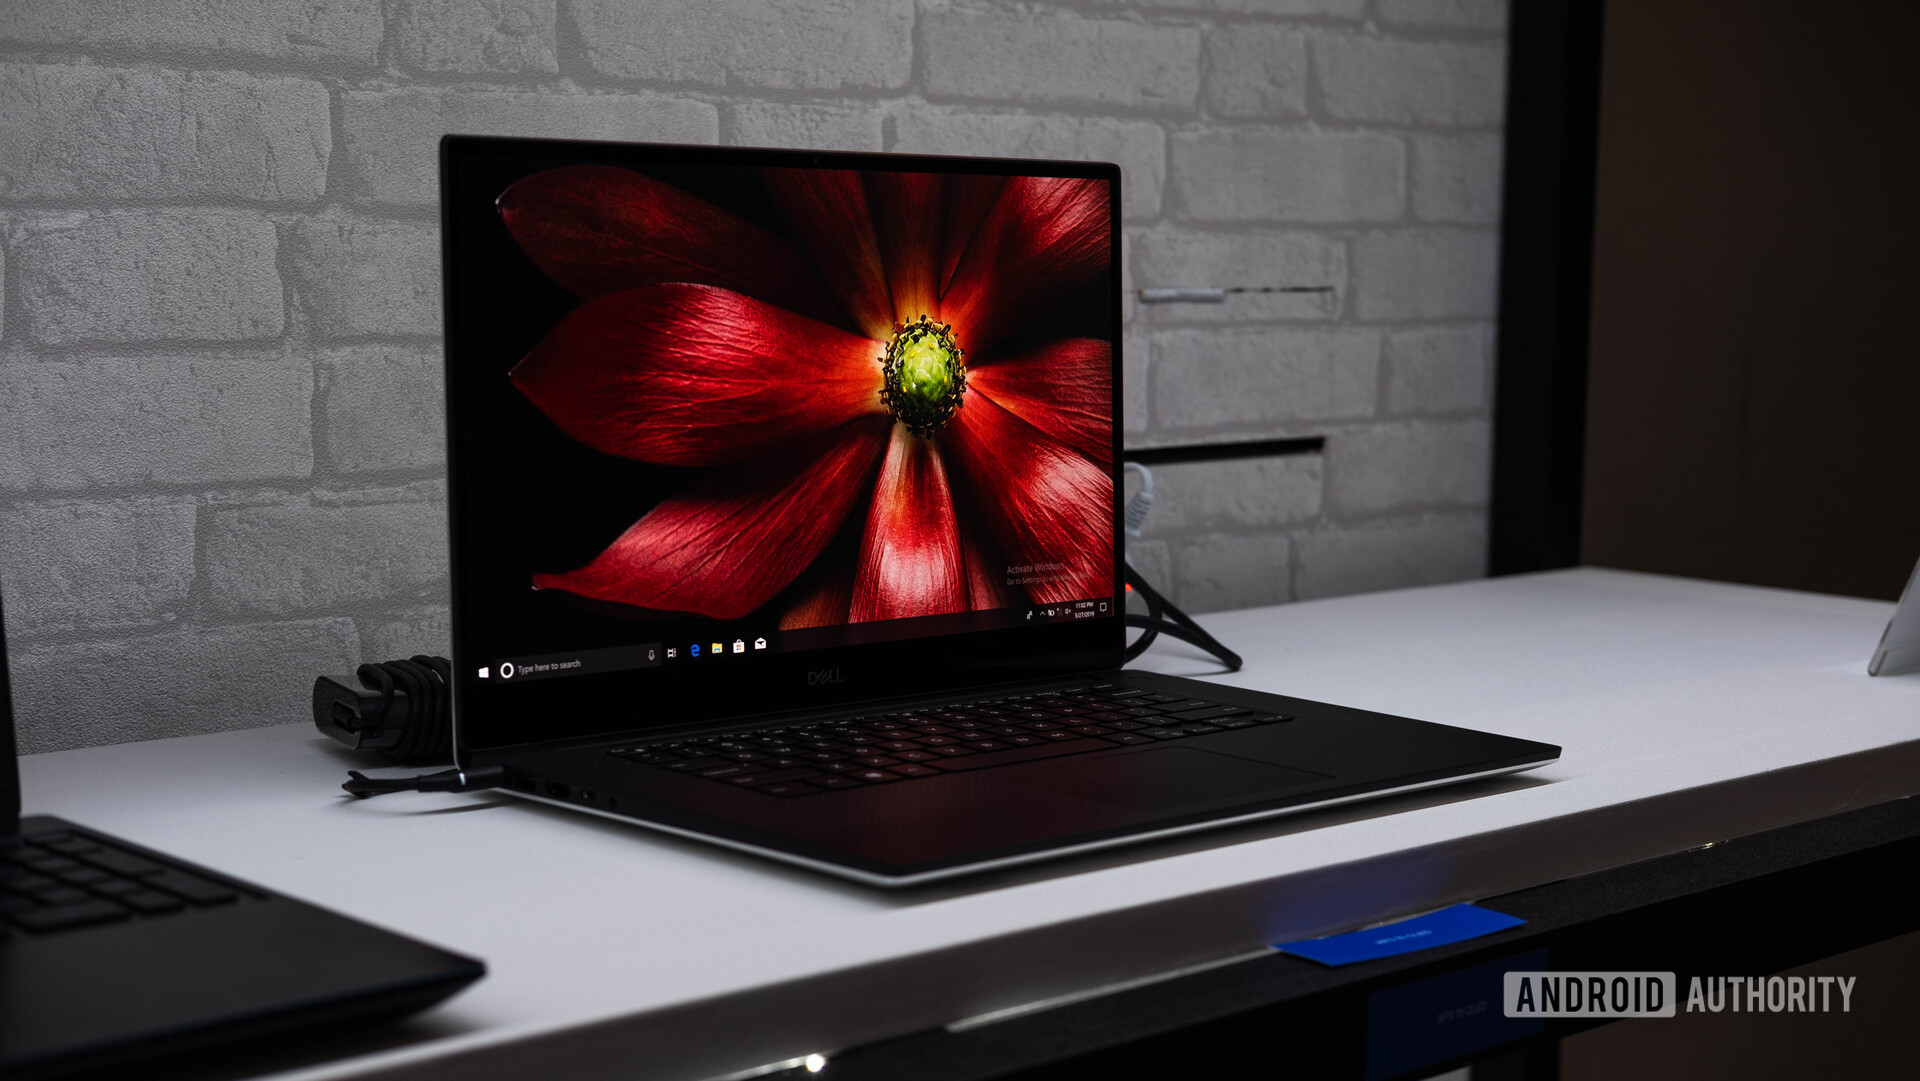 Best Dell Laptop Deals Save 200 On A Vostro 14 And More August 2020